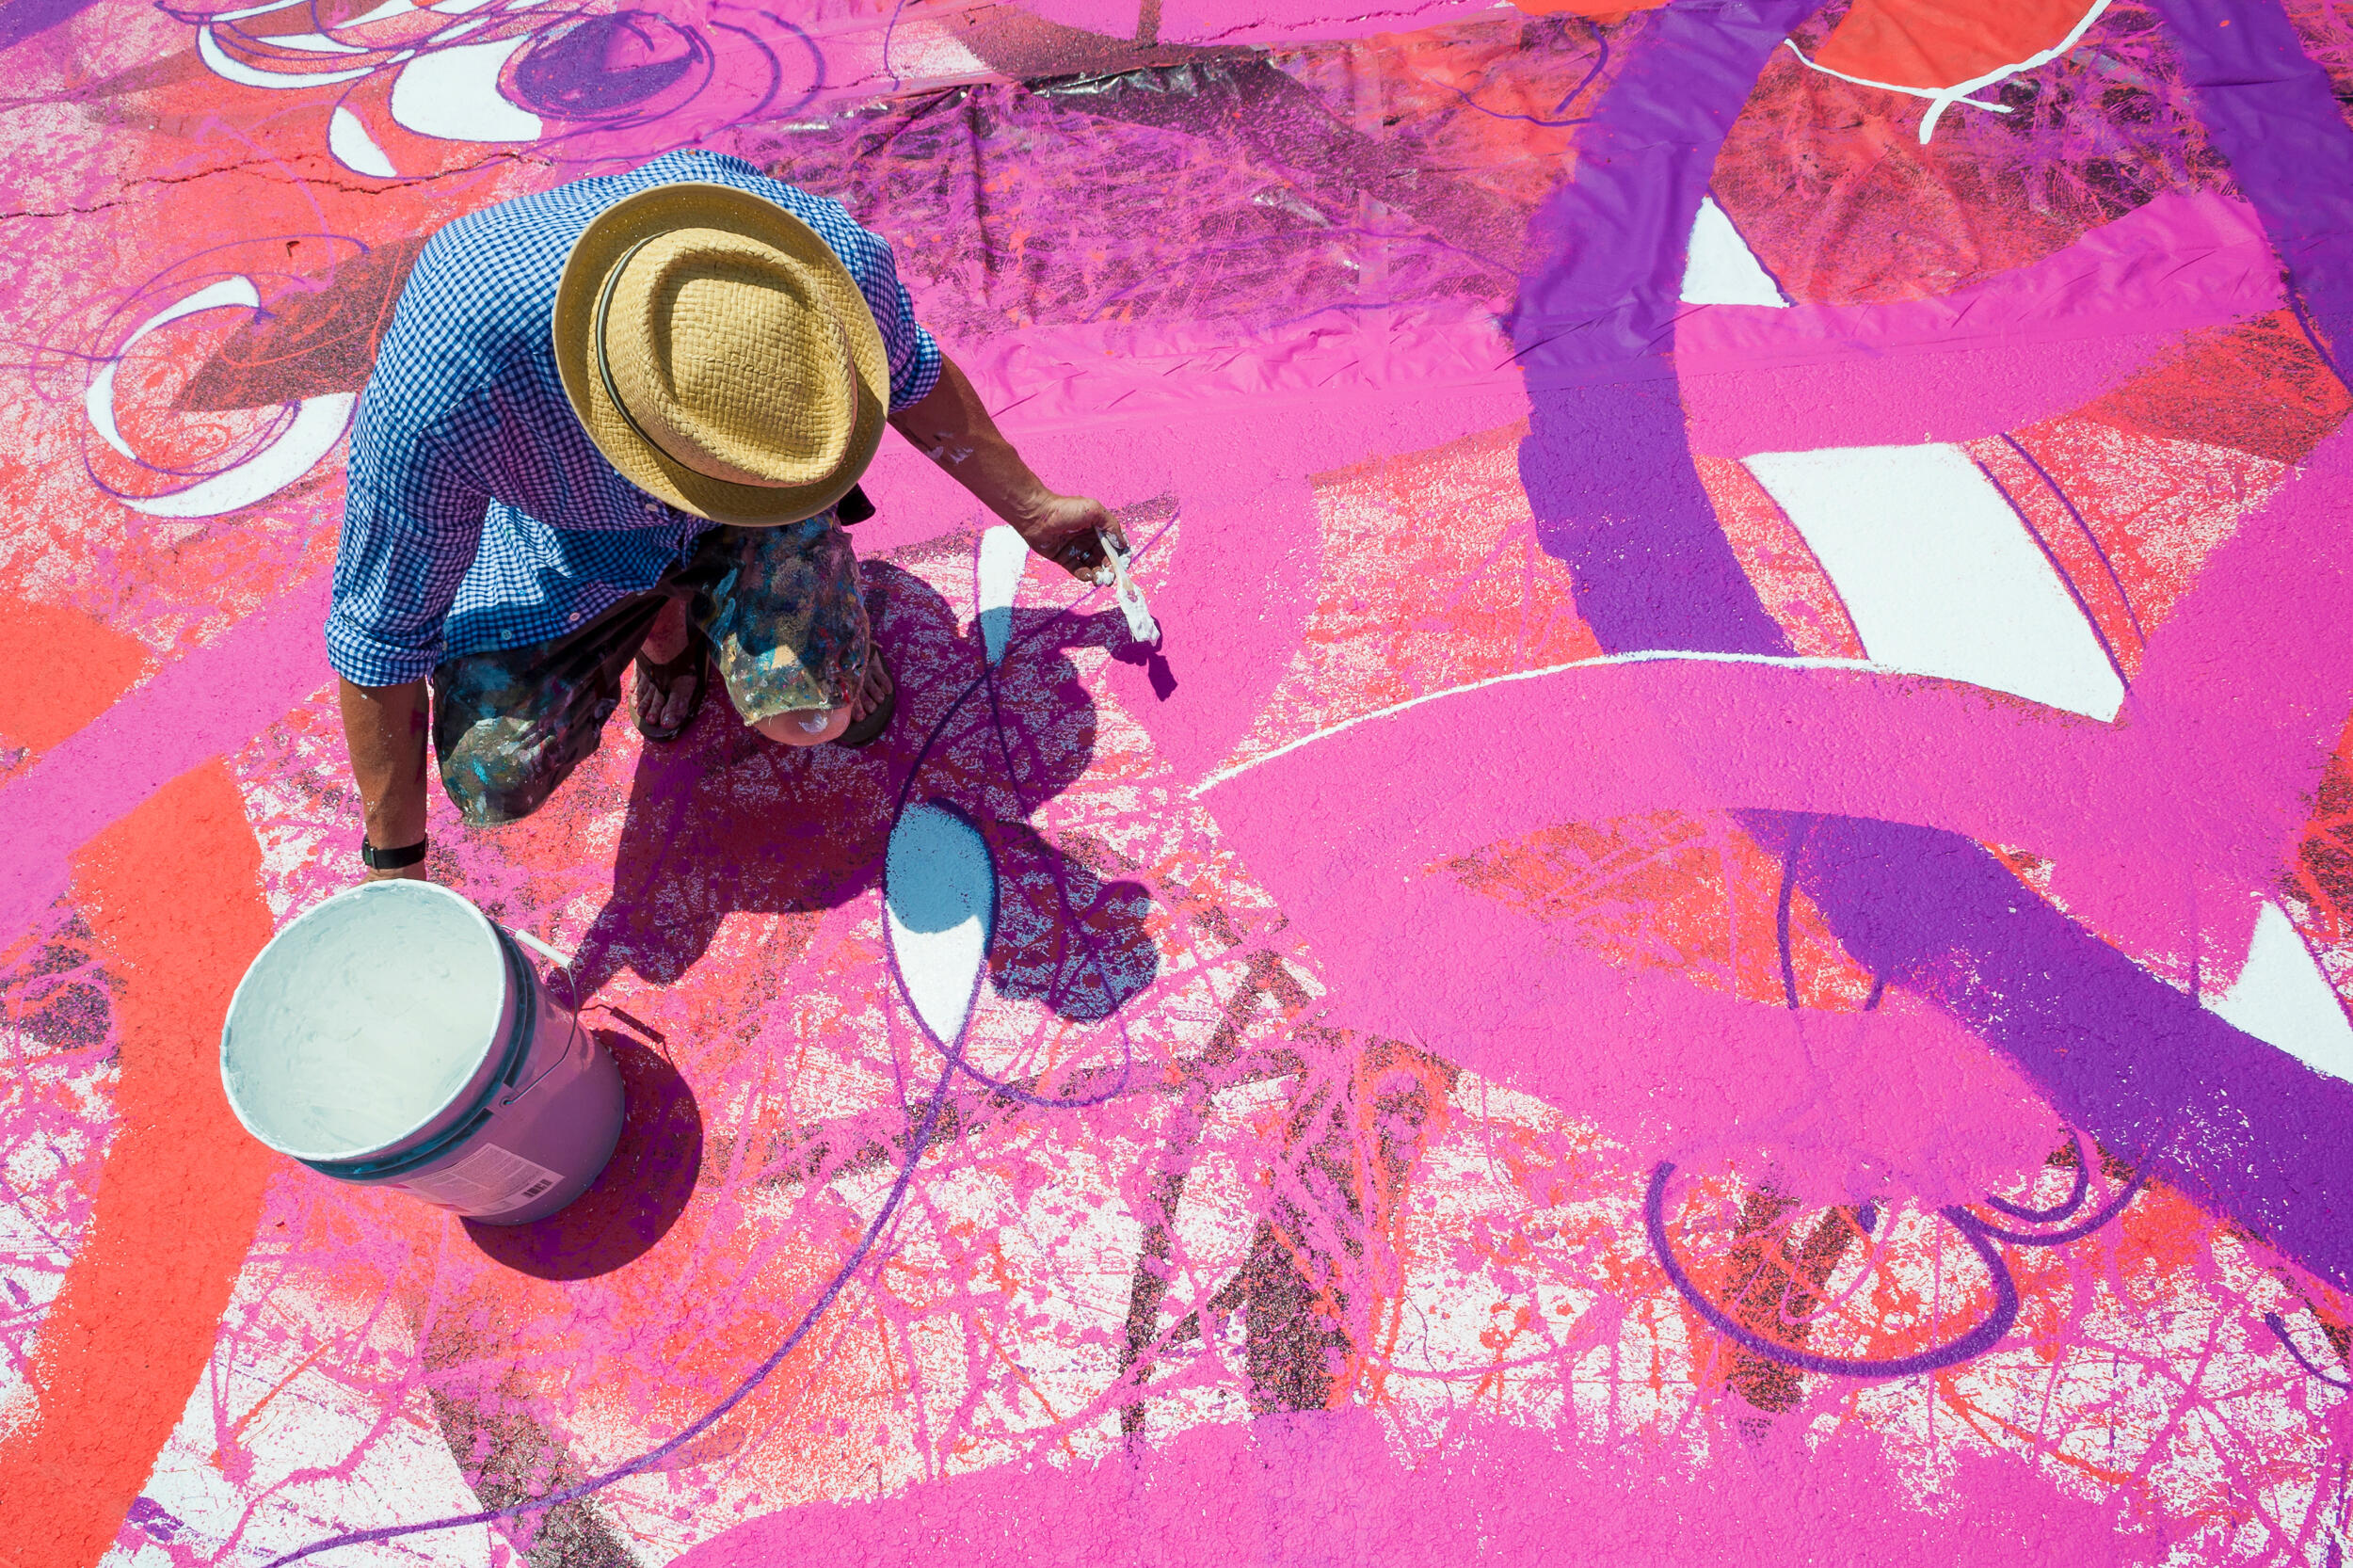 A man in a hat and coveralls with a paintbrush paints a colorful mural underfoot on pavement outside a building